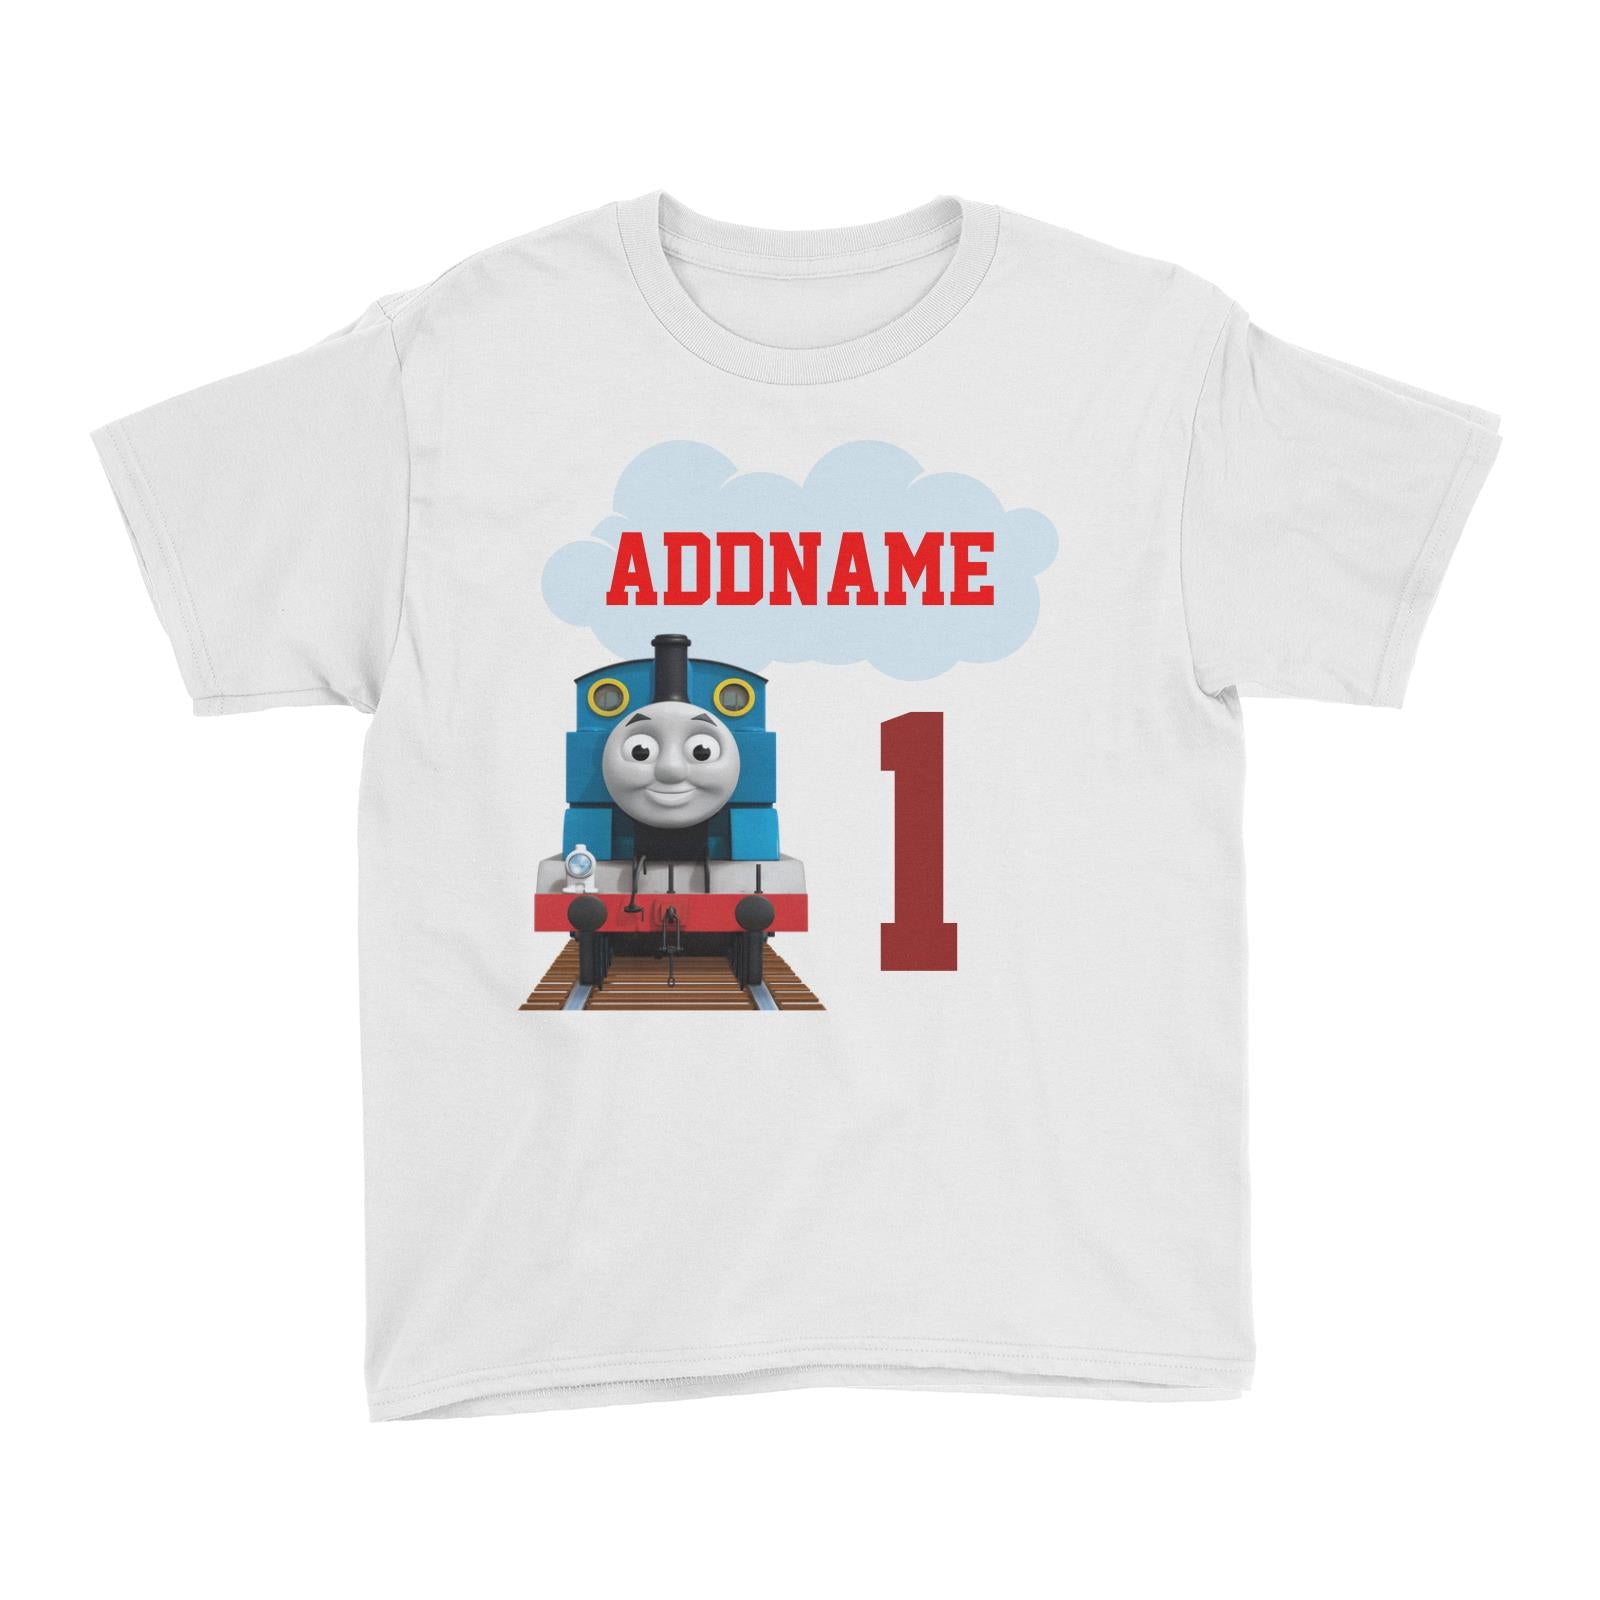 Thomas The Train Birthday Theme Personalizable with Name and Number Kid's T-Shirt